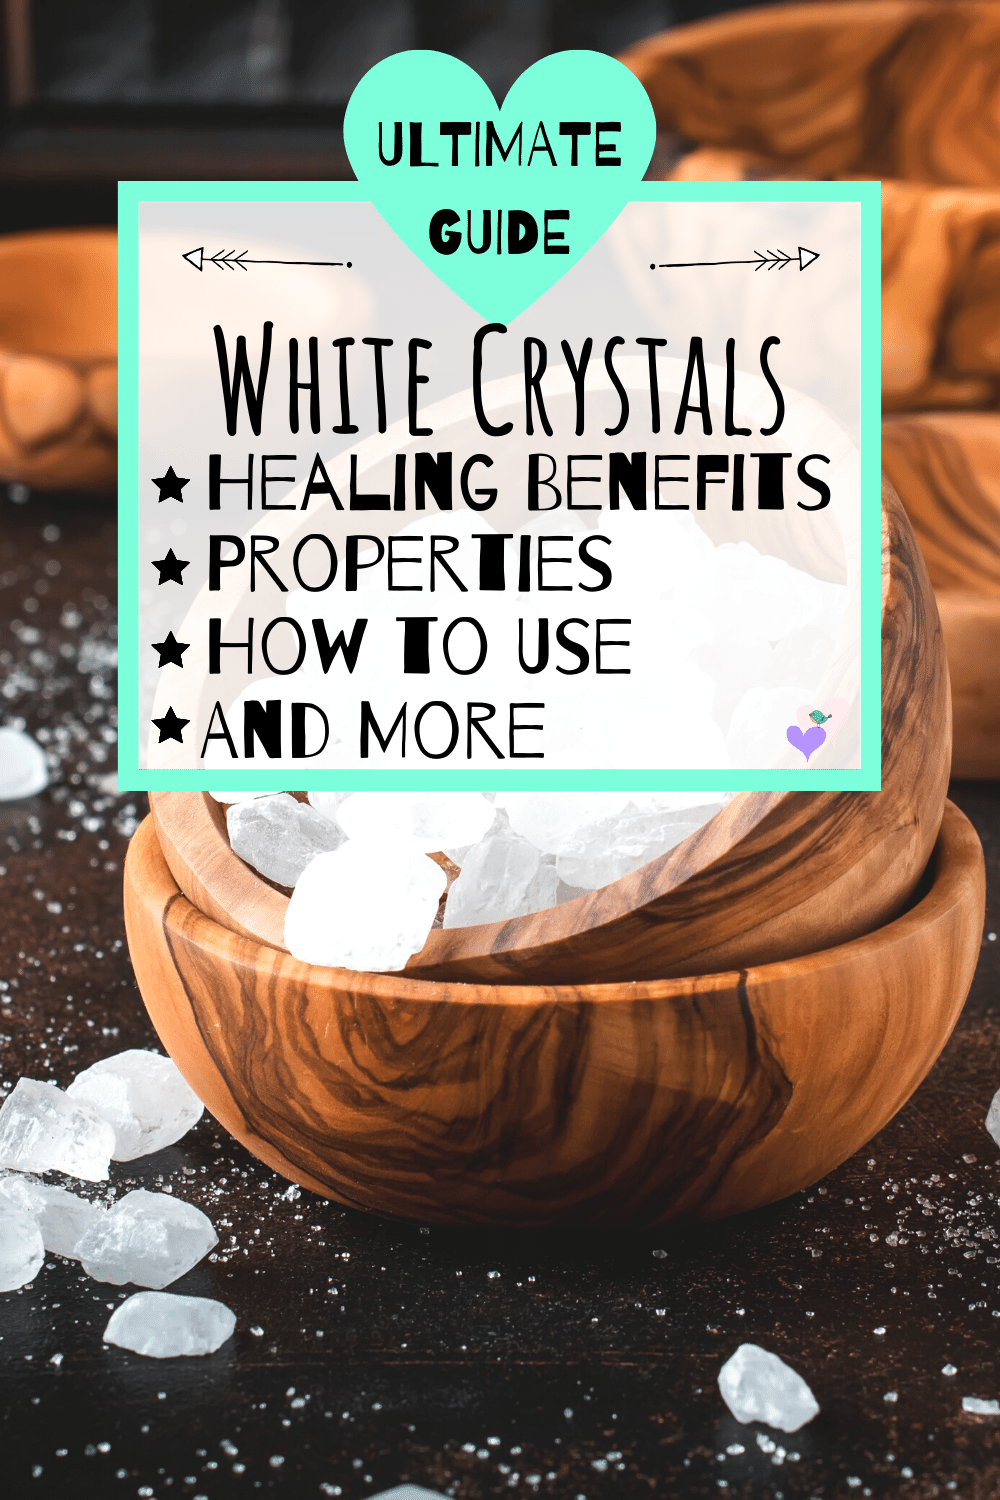 Ultimate Guide To White Crystals. Benefits, Healing properties, how to use white crystals and more!